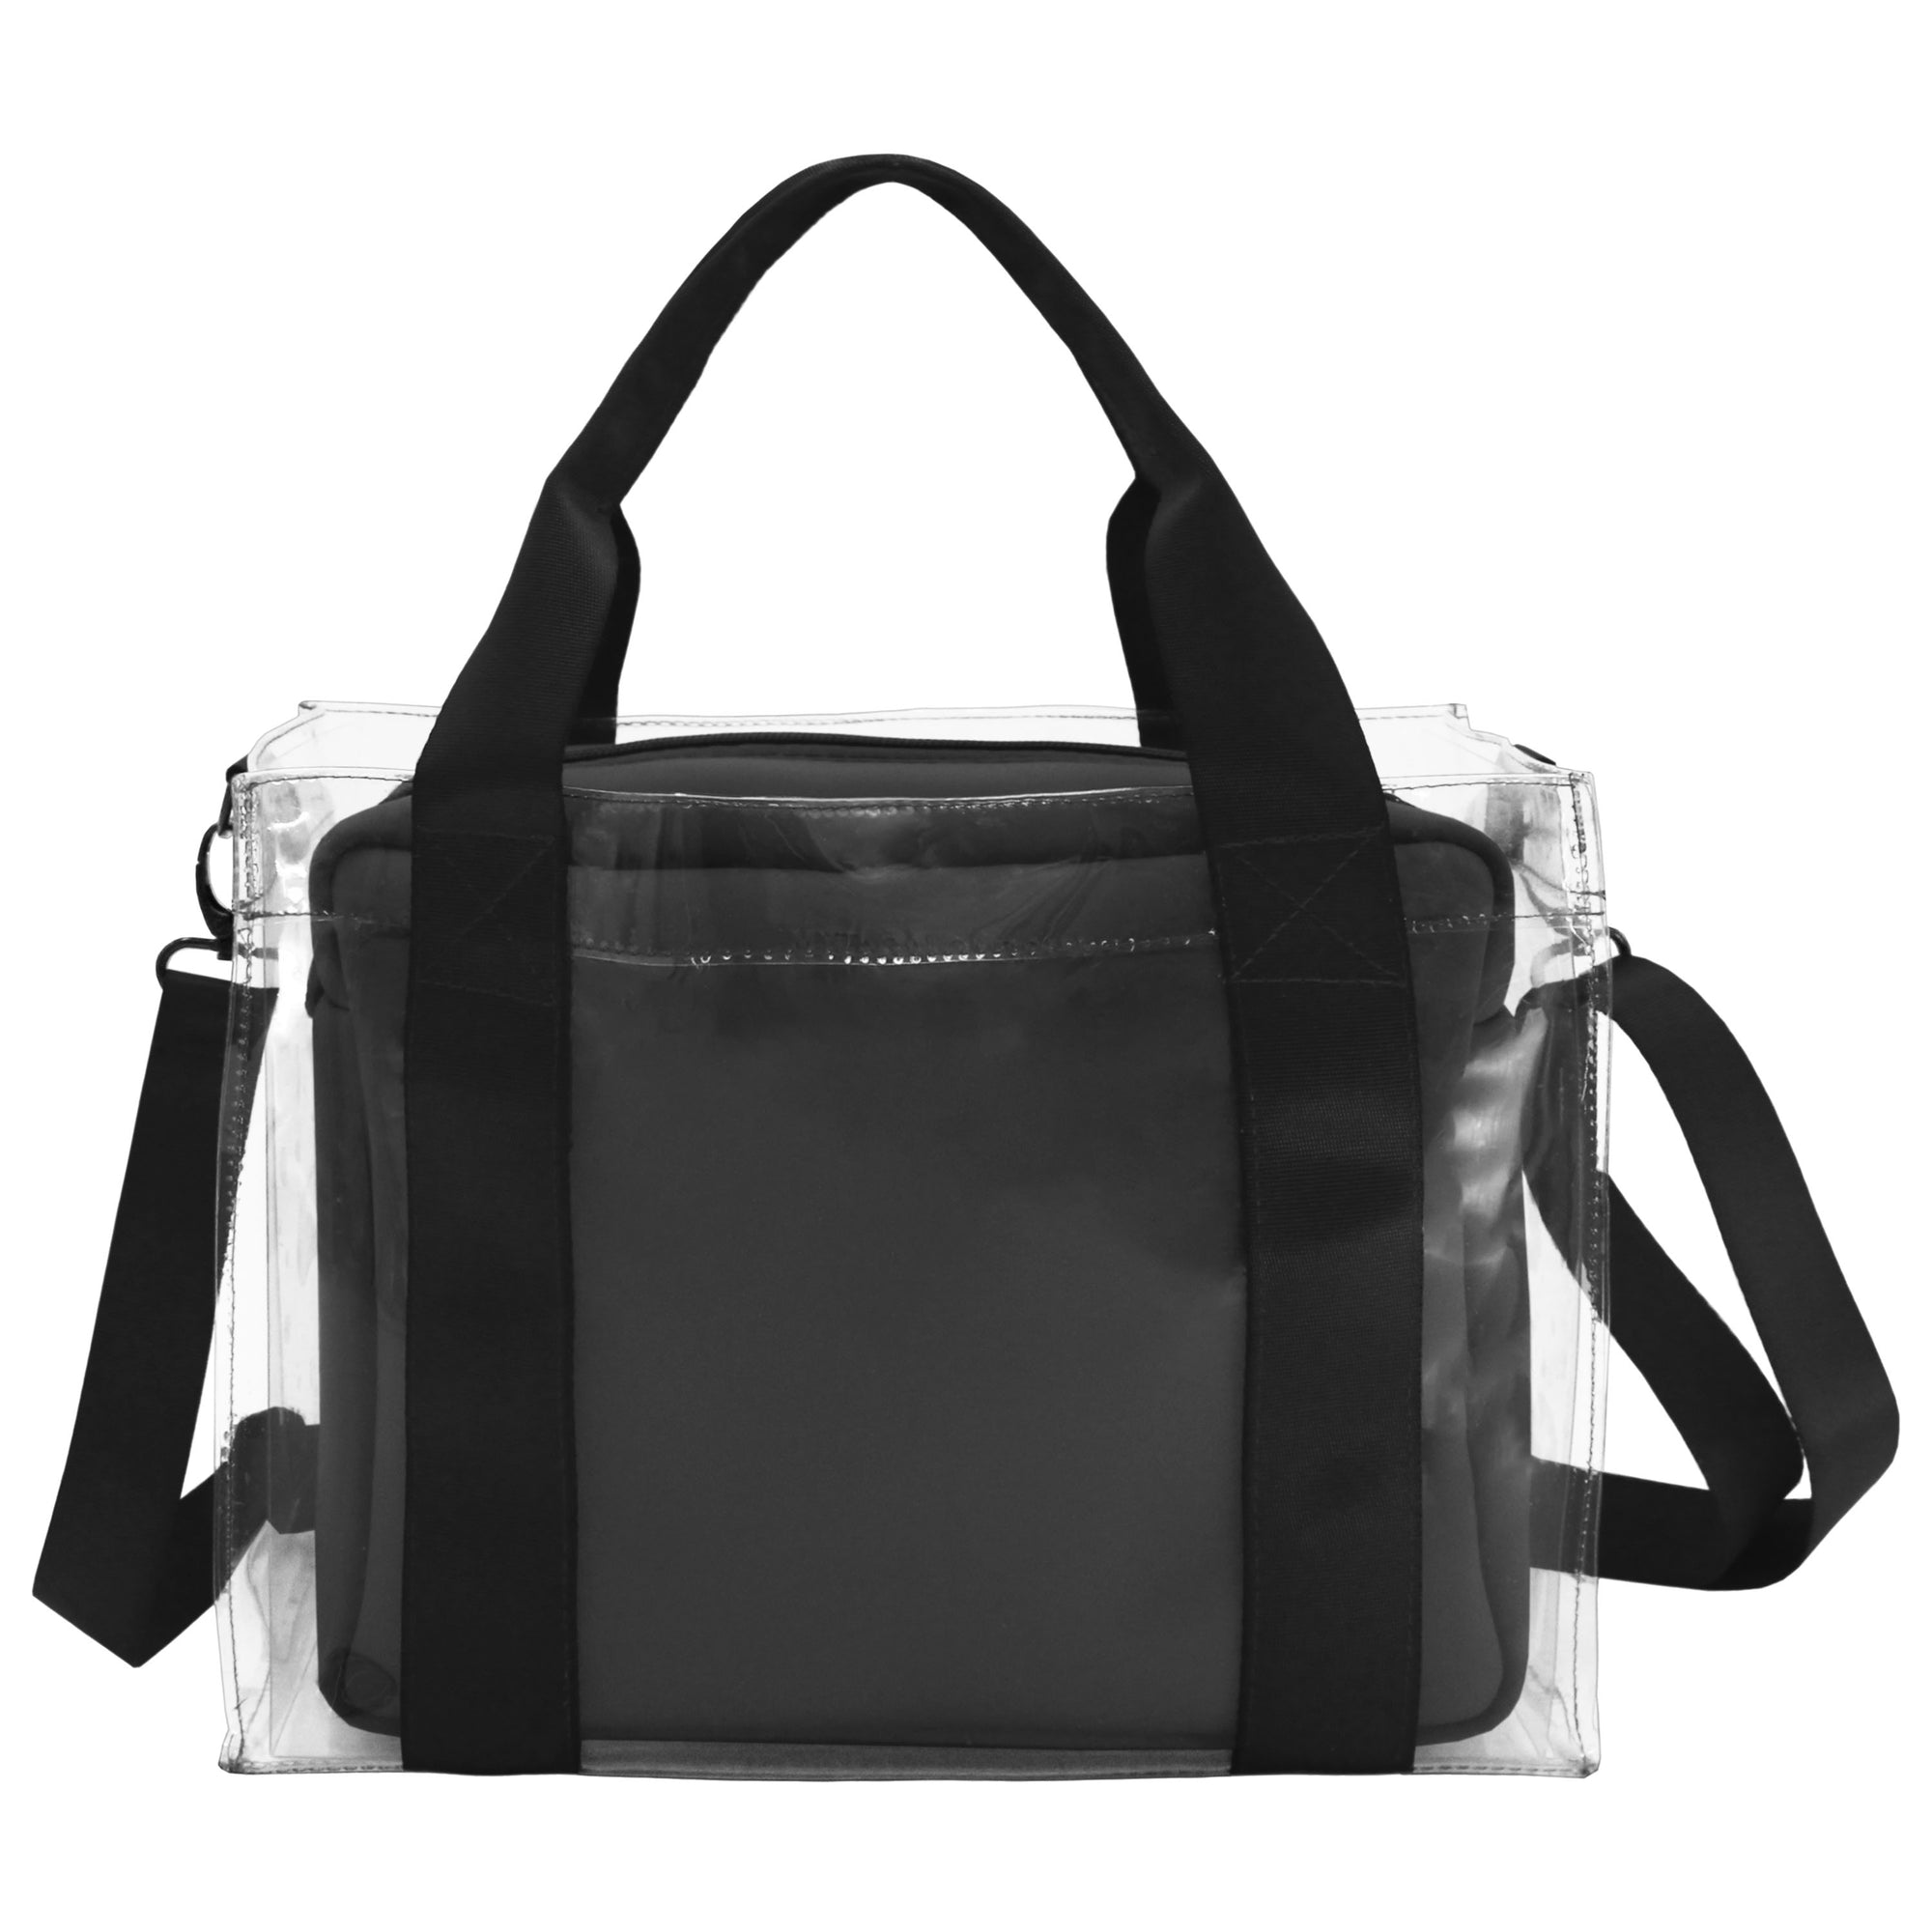 2 PIECE LUNCH TOTE WITH INSERT - EVERLEIGH ONYX – MYTAGALONGS